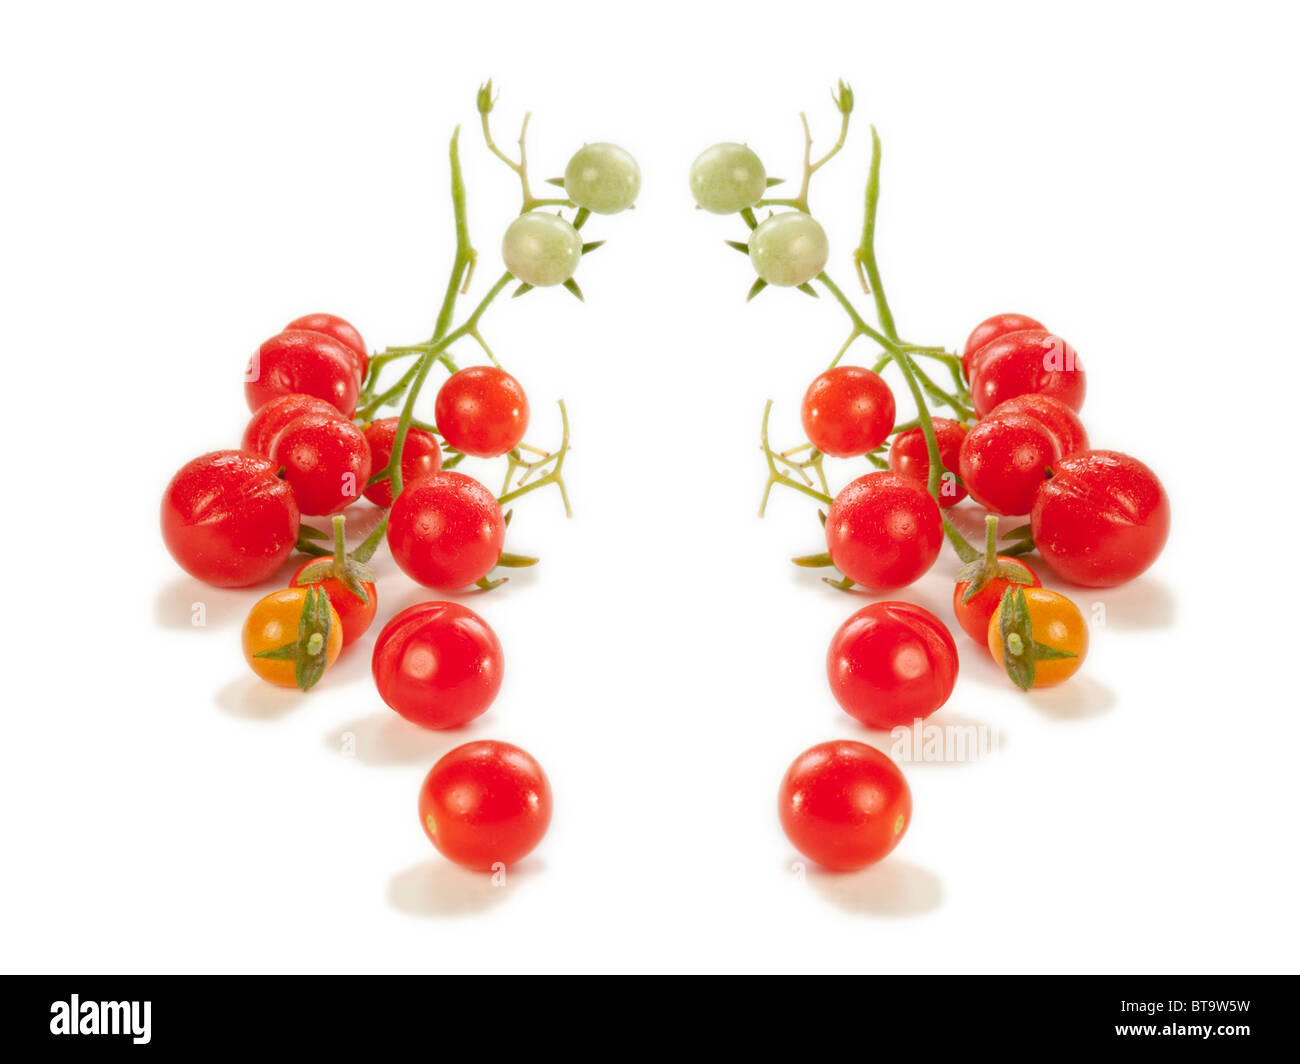 A bunch of cherry tomatoes on the vine from a backyard garden mirrored for dramatic effect. Stock Photo